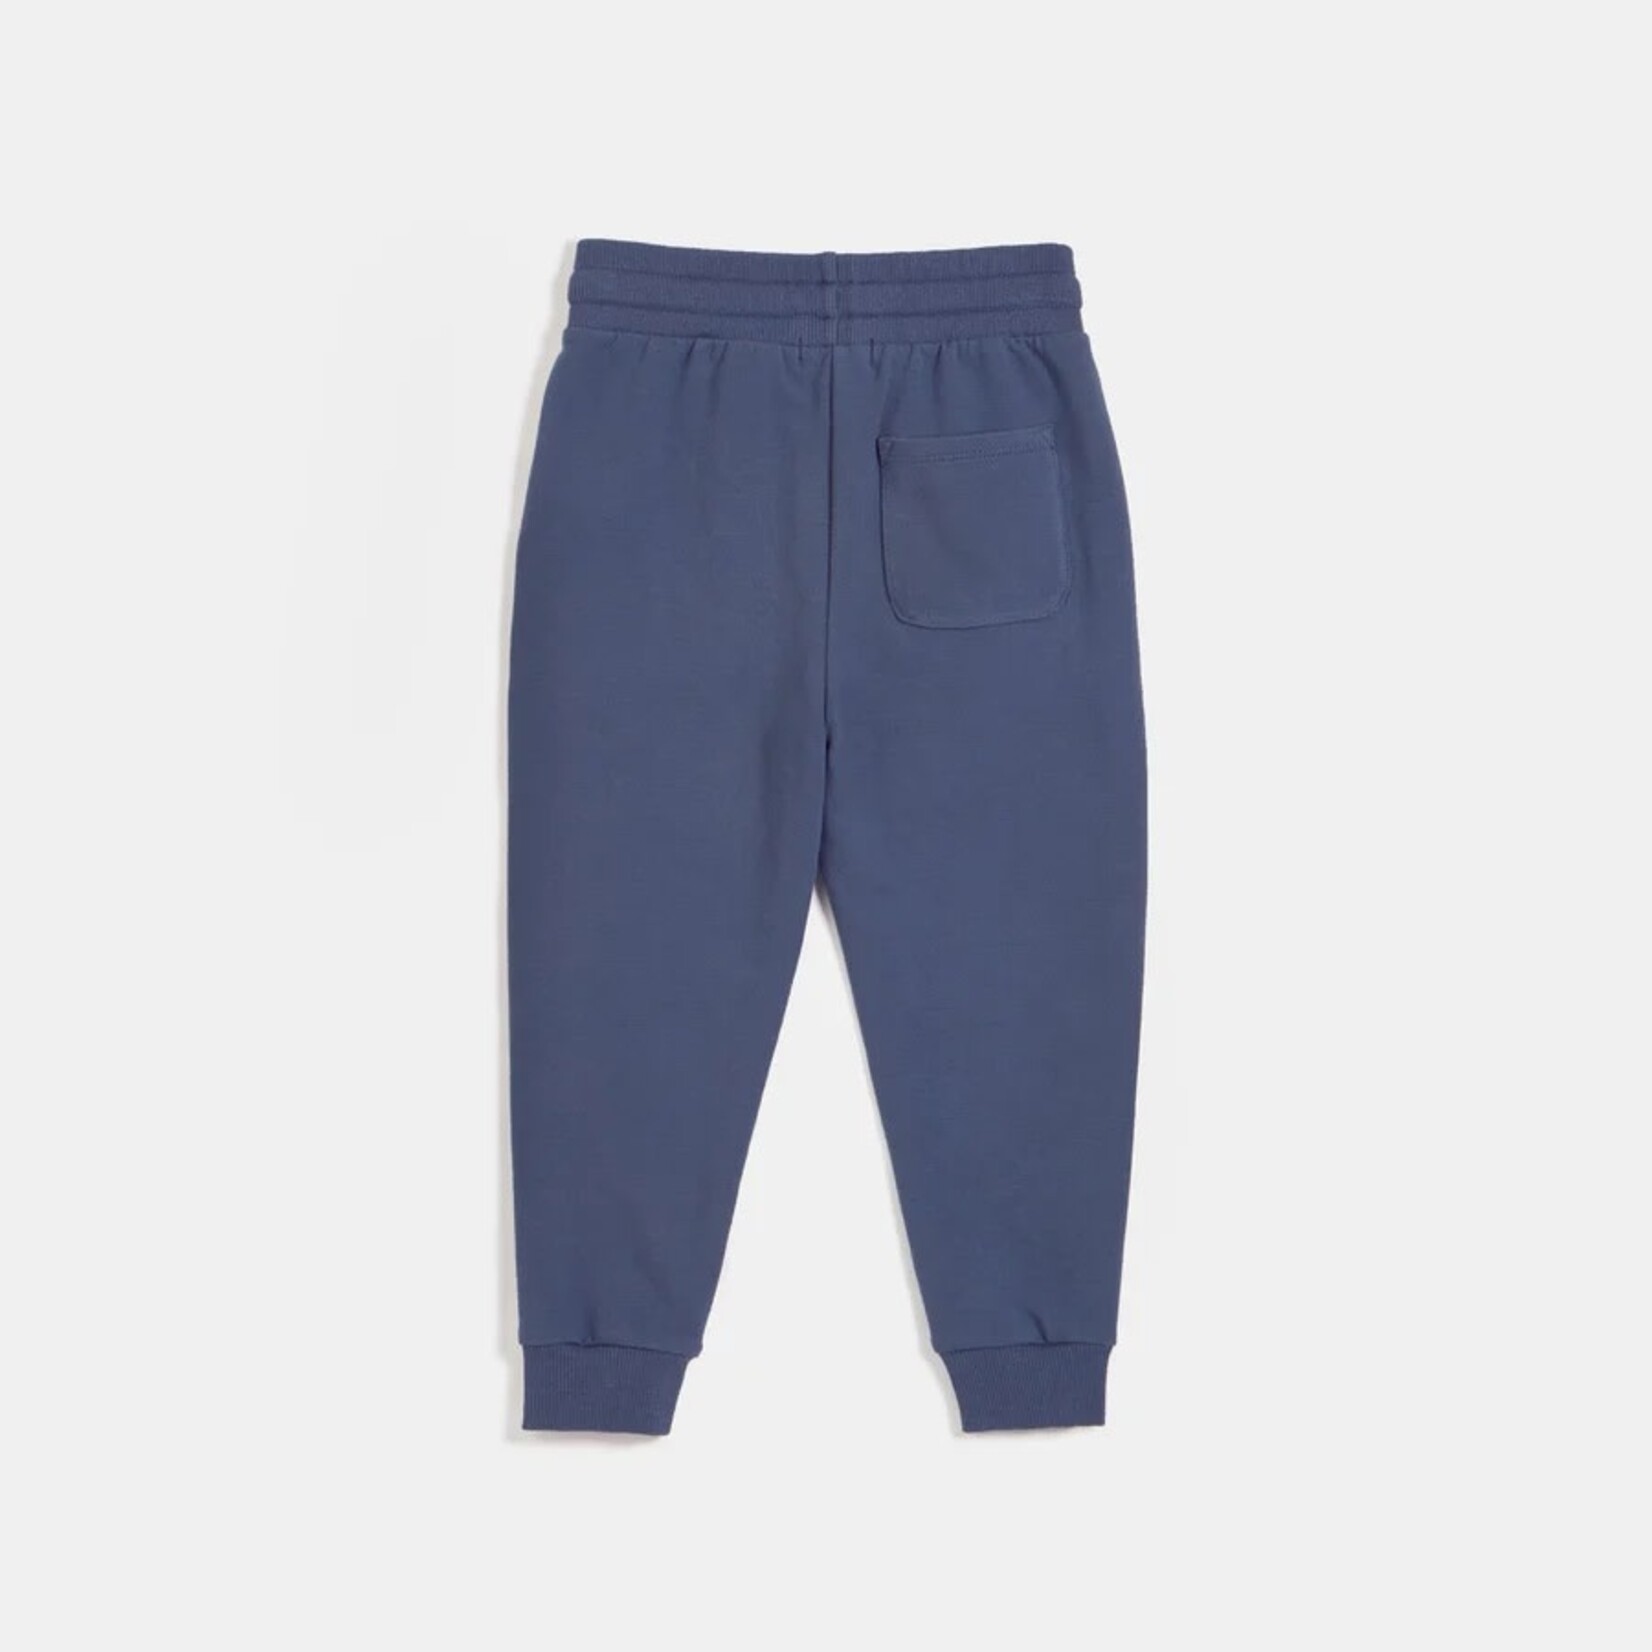 Miles the label MILES THE LABEL - Joggings Pants in Vintage Blue